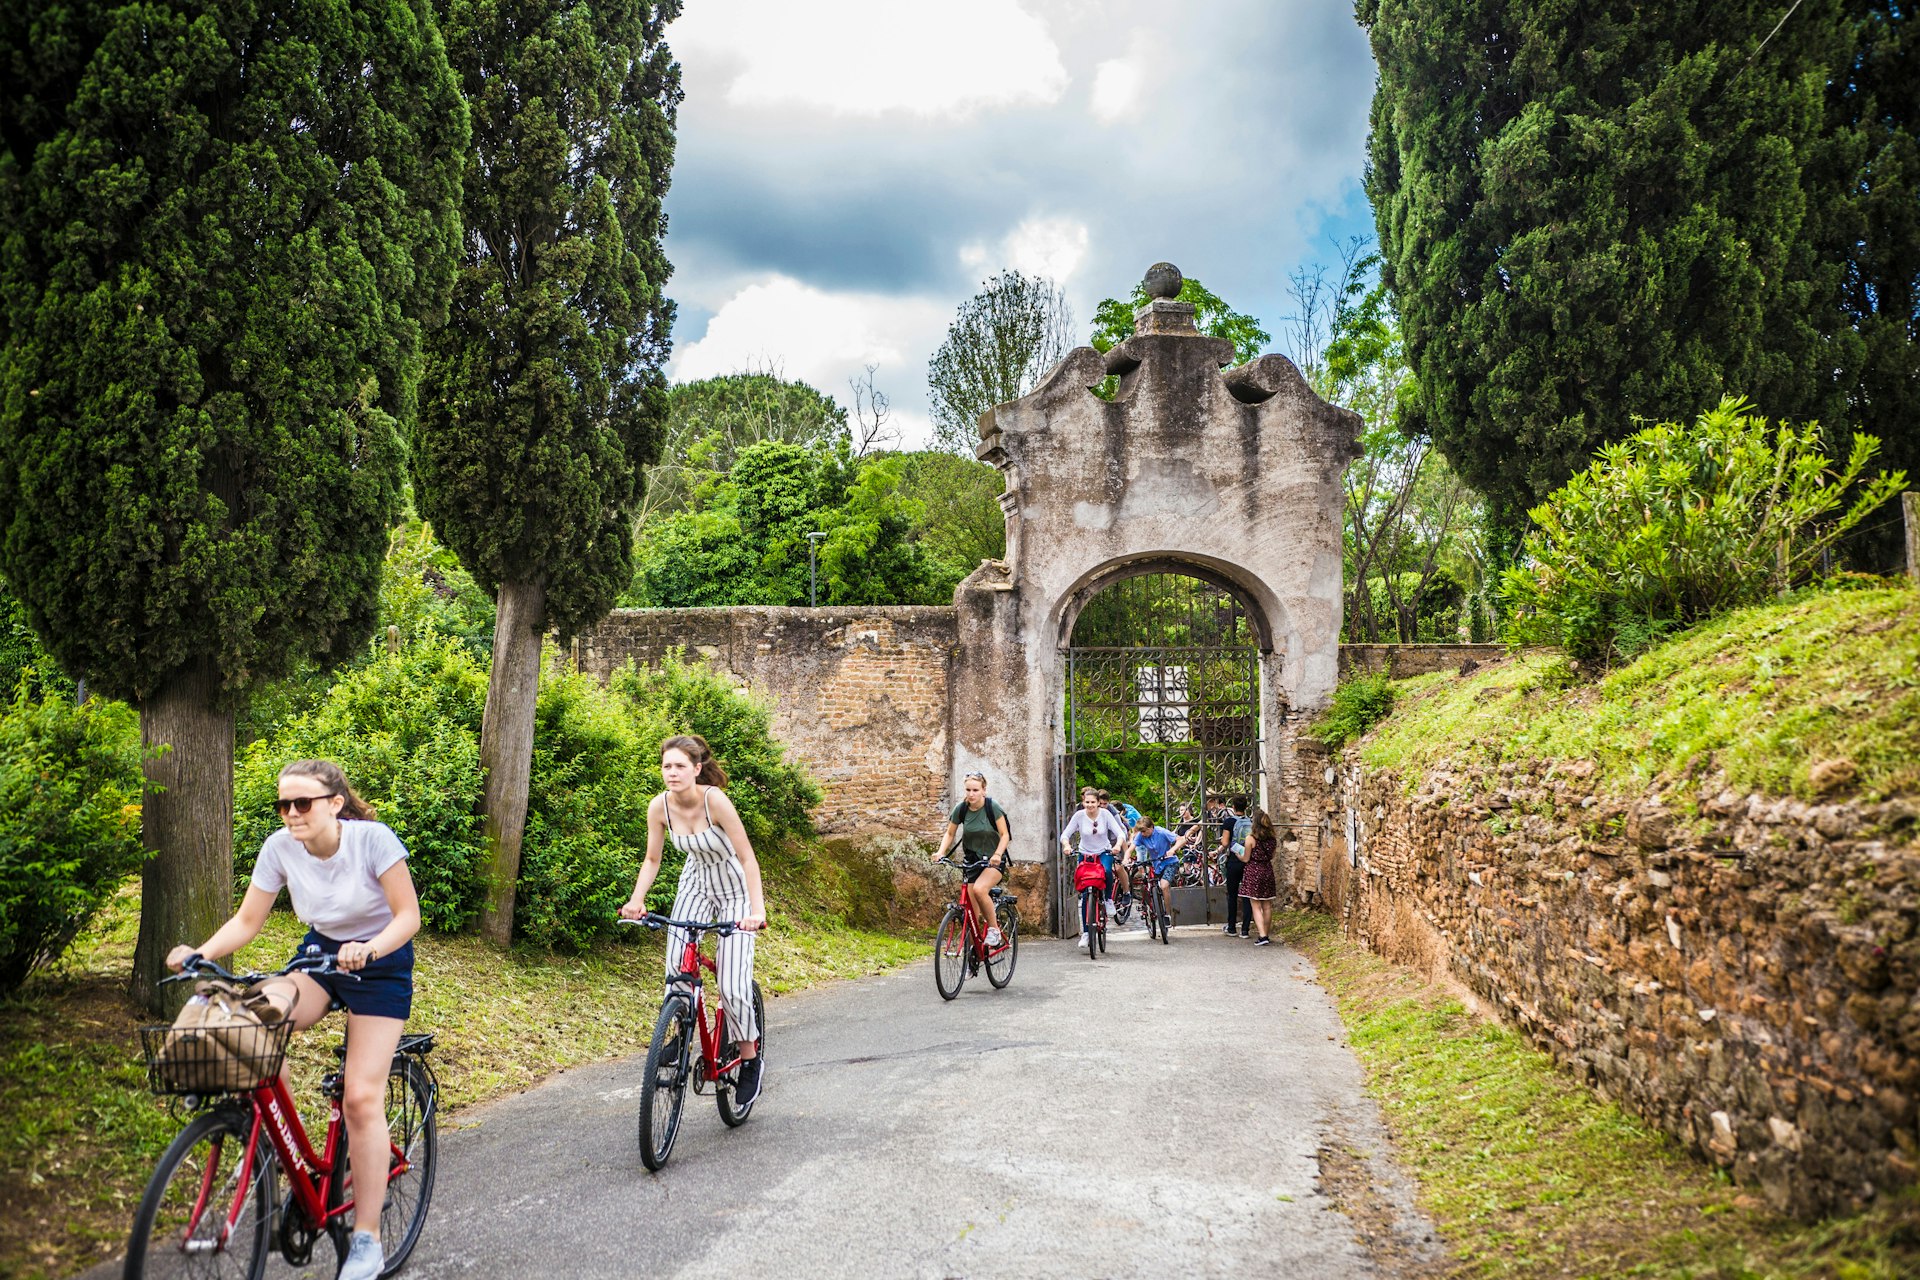 Girls cycle through the entrance gate to the Catacombe di San Callisto cave